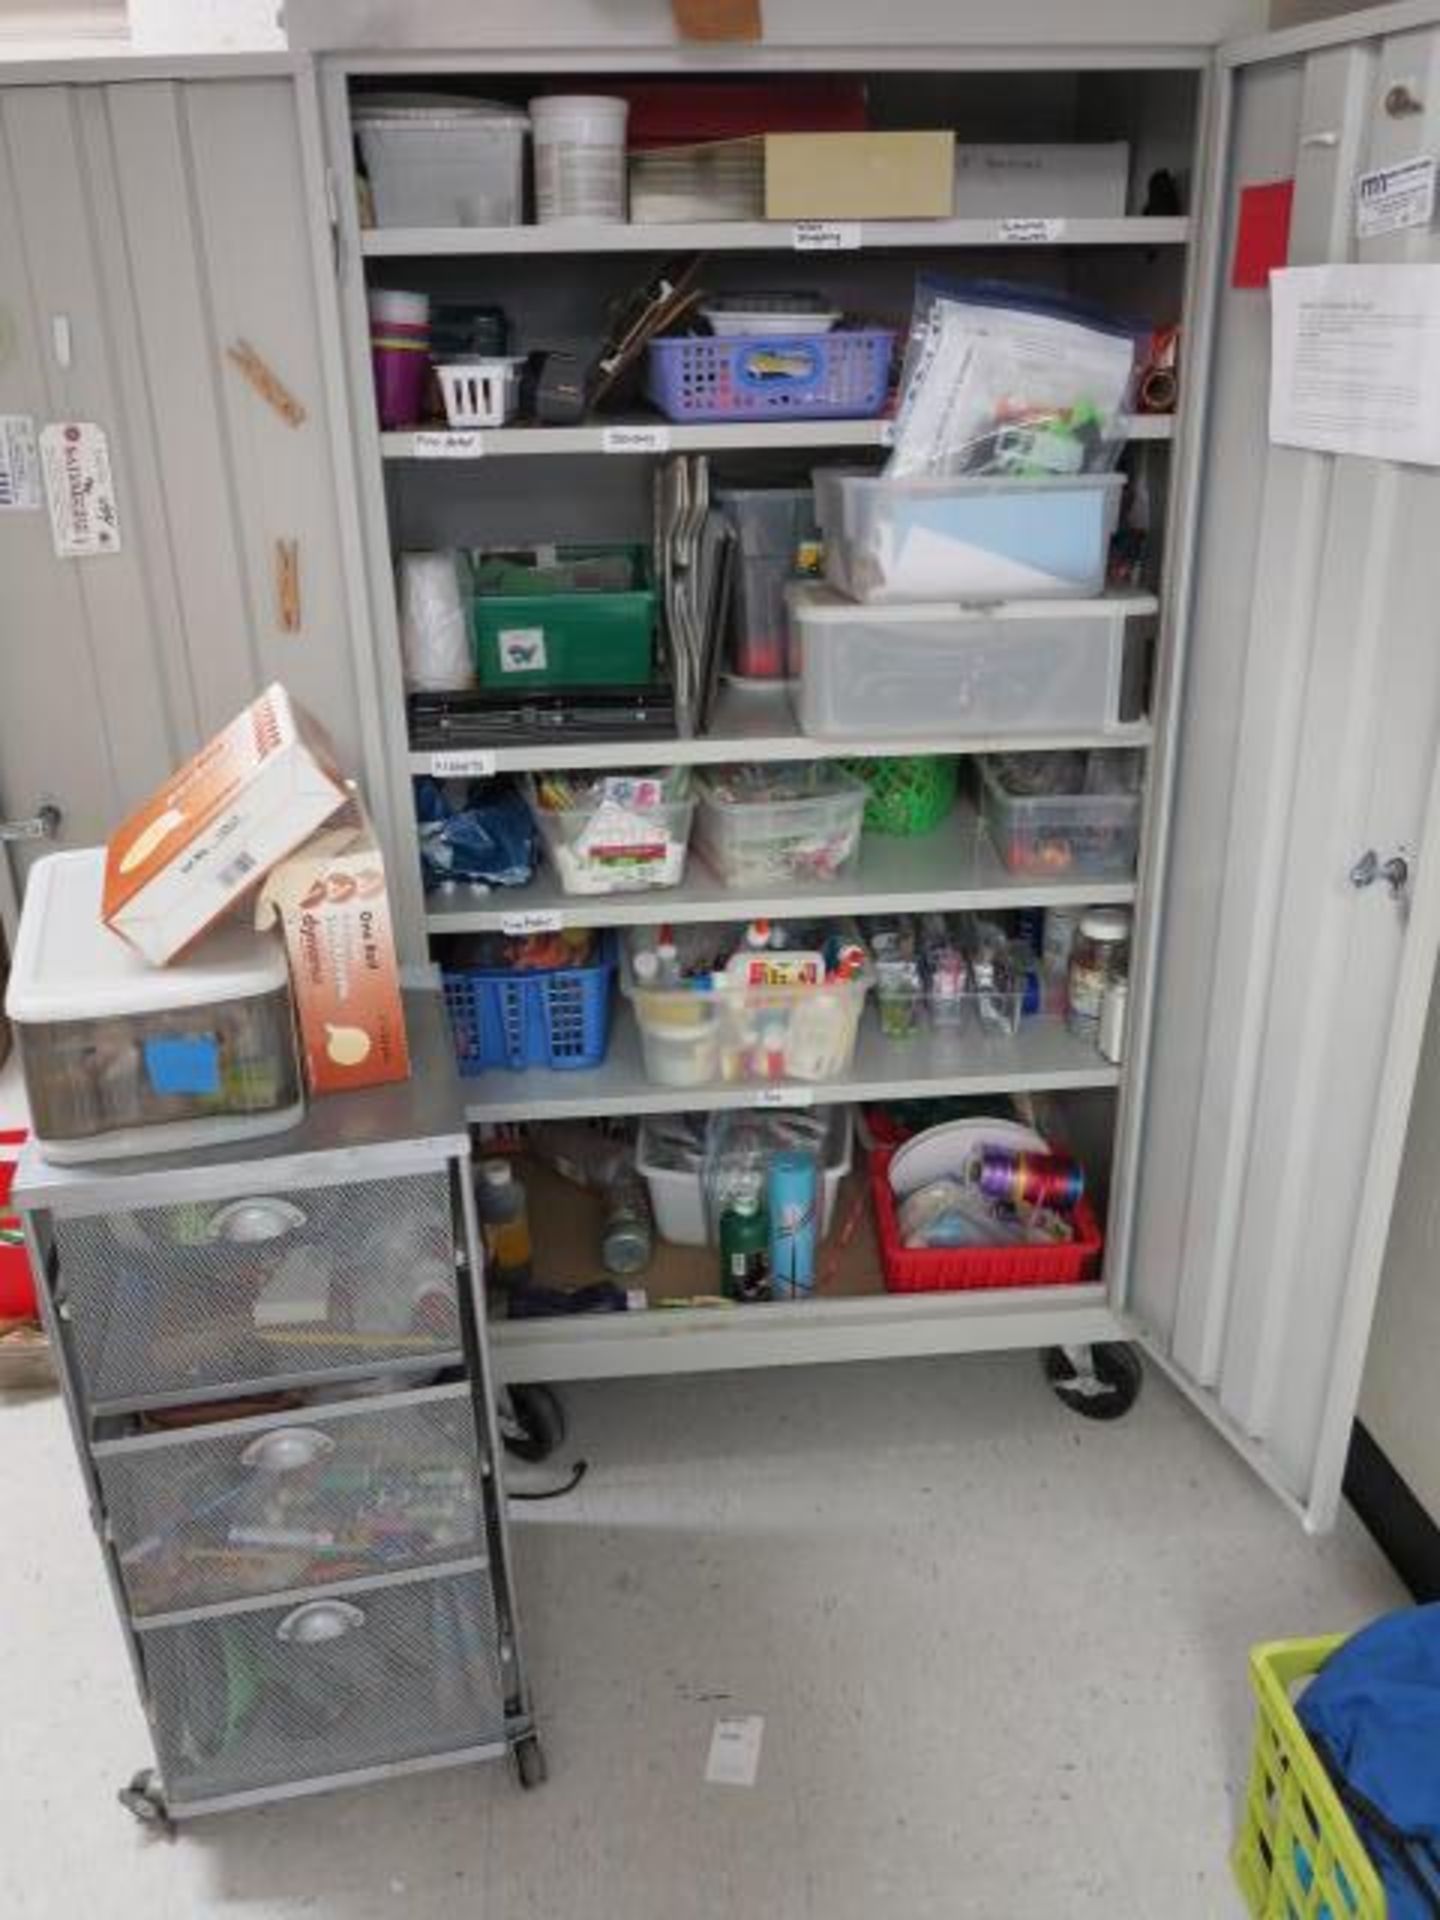 2 Door Cabinet with Contents, 3 Drawer Rolling Cart and Contents of Shelves Located in PT Room